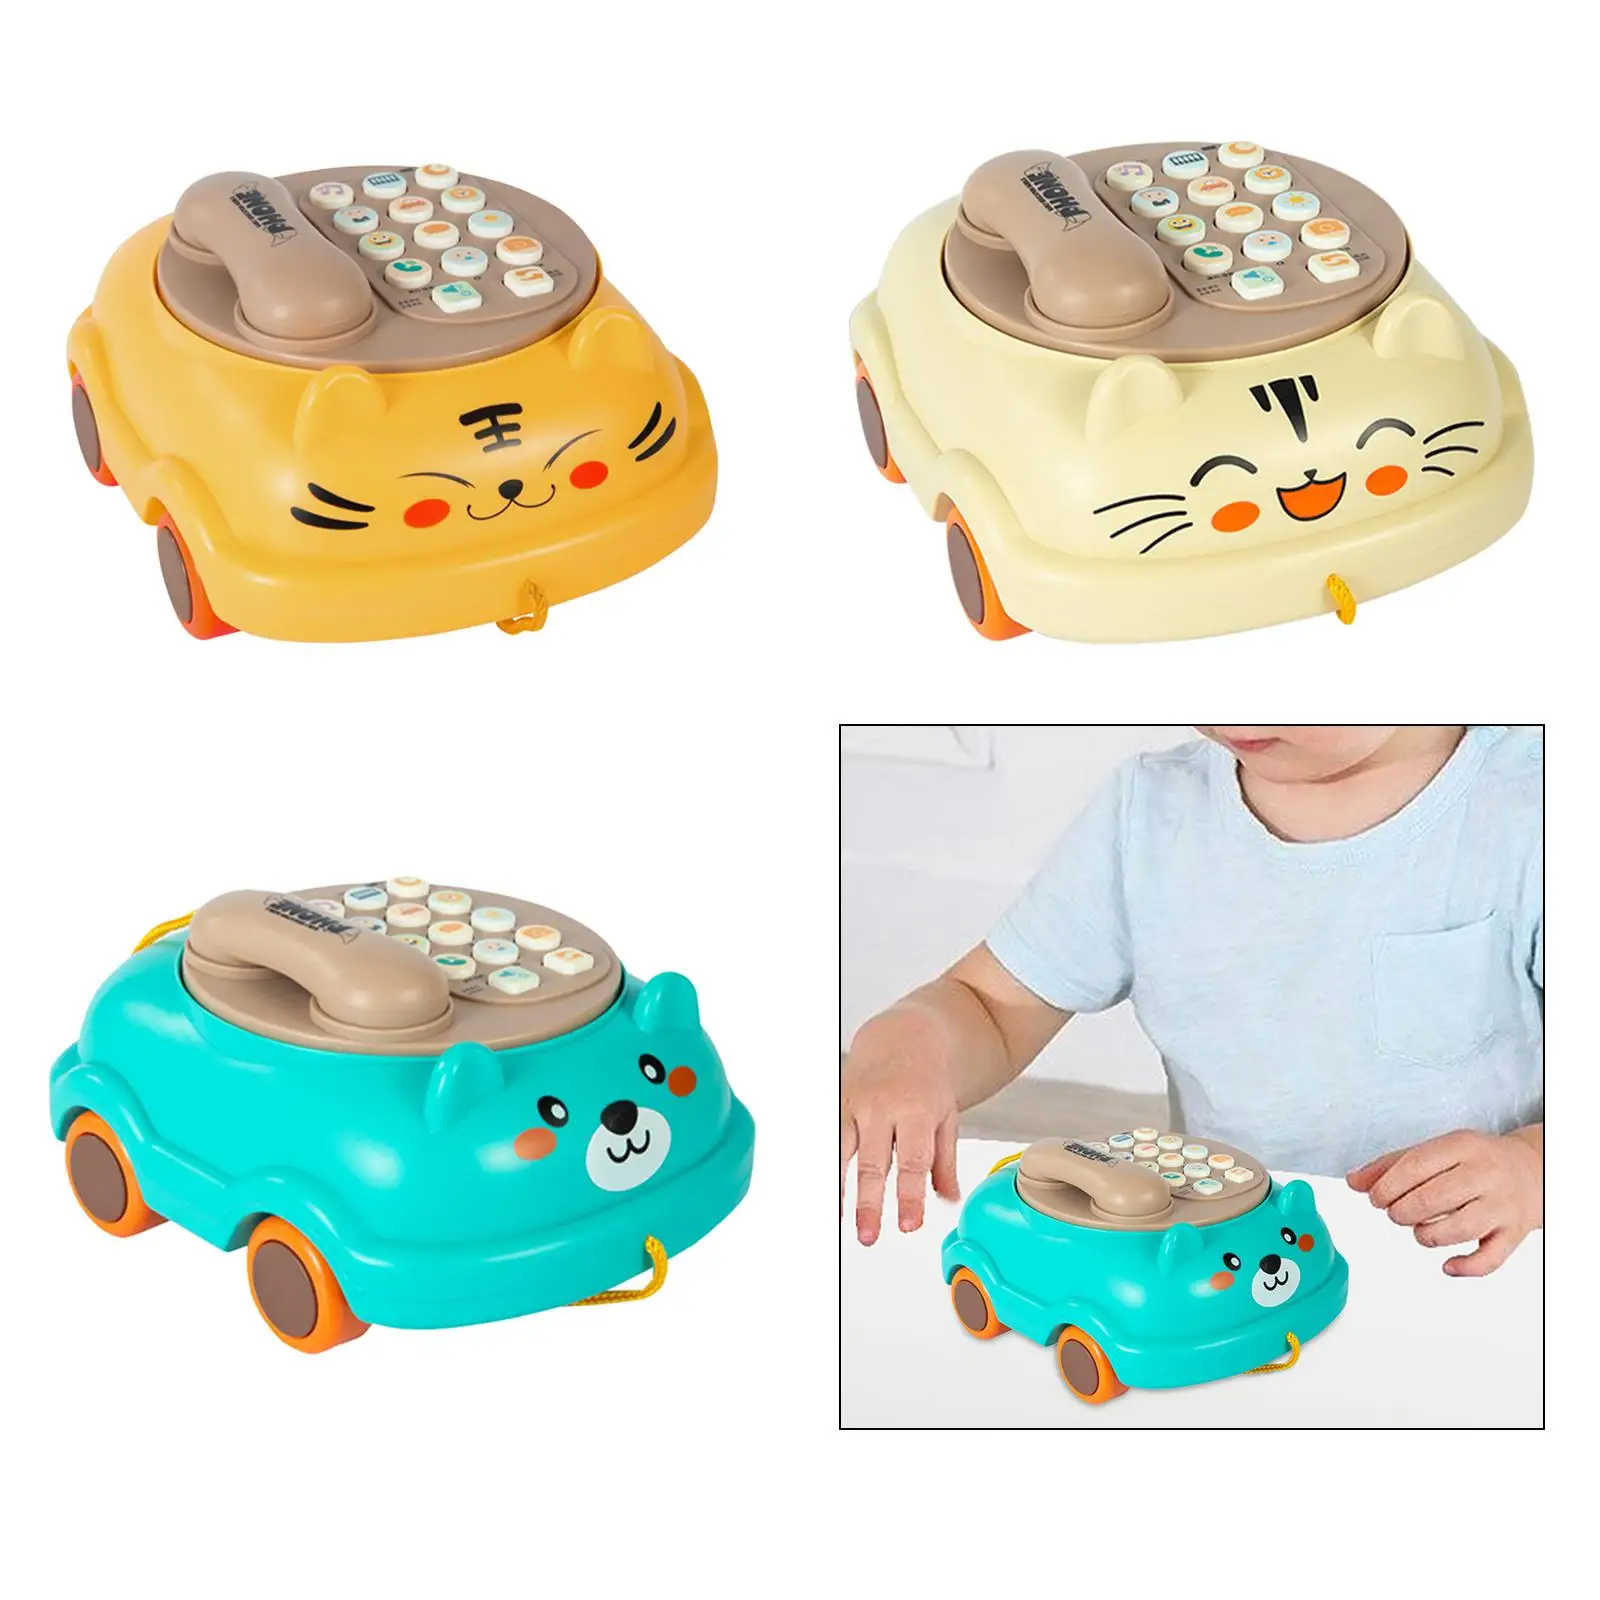 Early Learning Toy Pretend Phone for Children Early Education Gift Girl